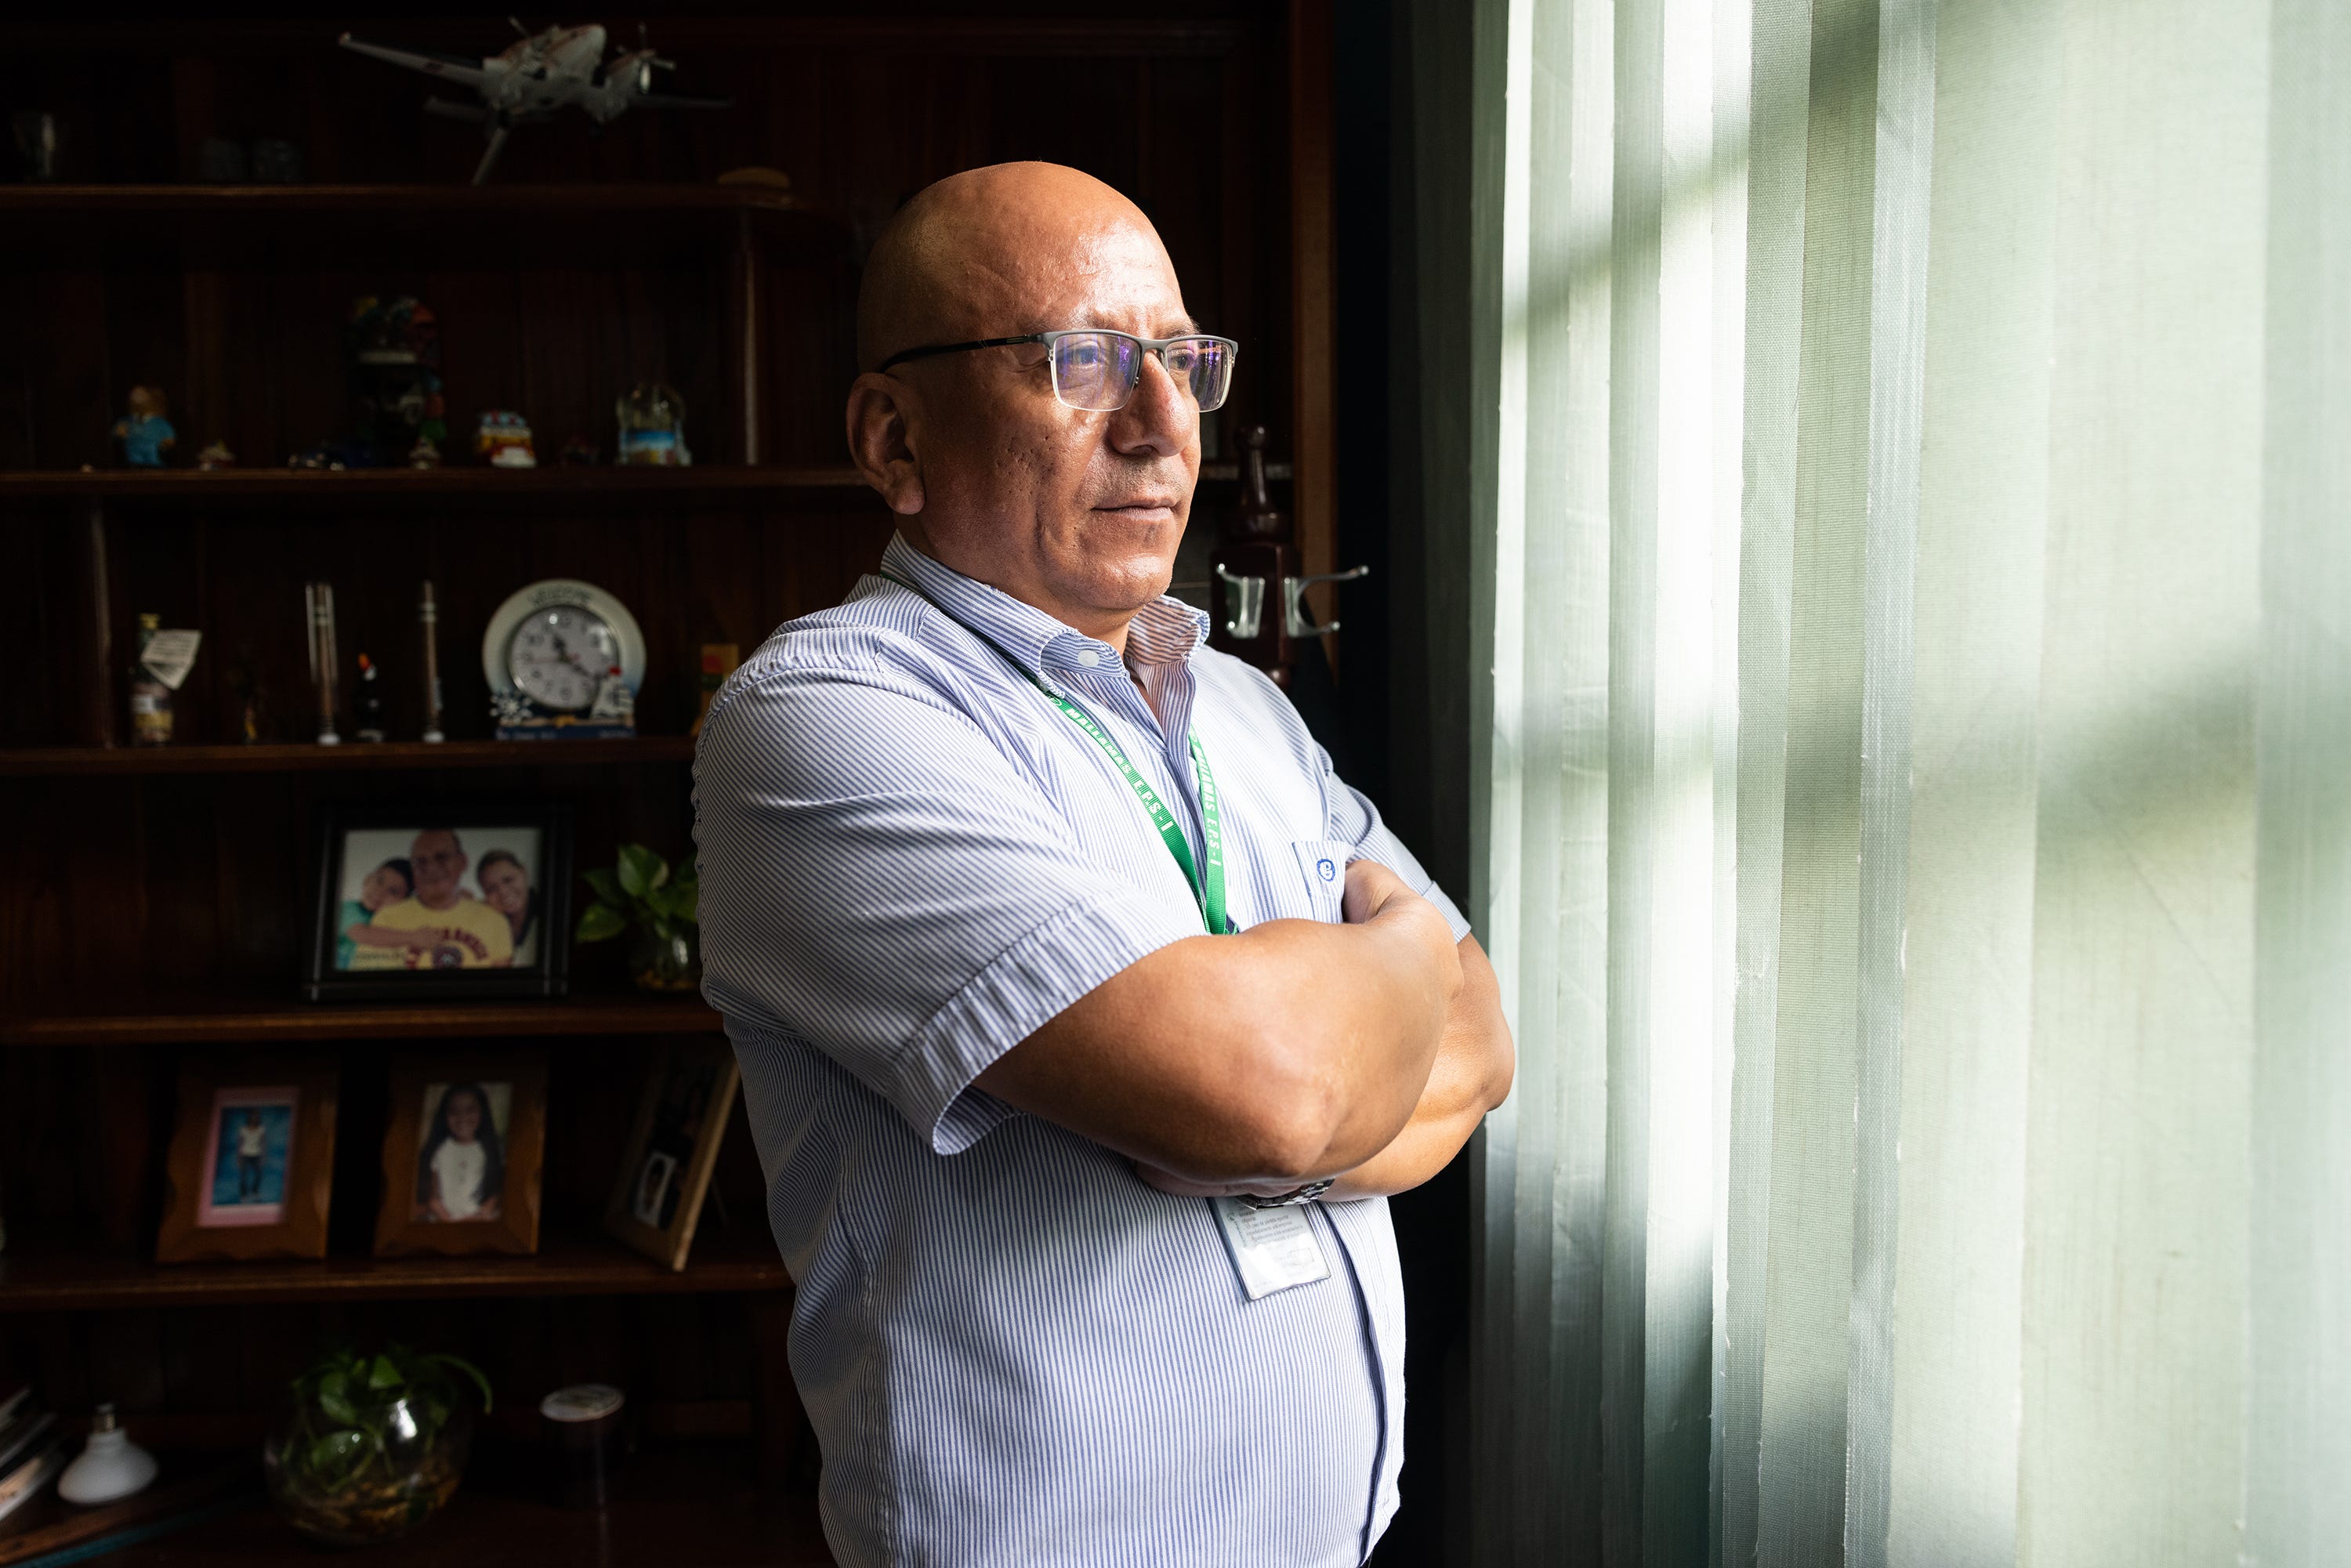 Gerardo Antonio Ordoñez, regional coordinator of Amazonas Mallamas, directs the health center specialized in Indigenous populations. He is in charge of surveillance for the well-being of those communities.